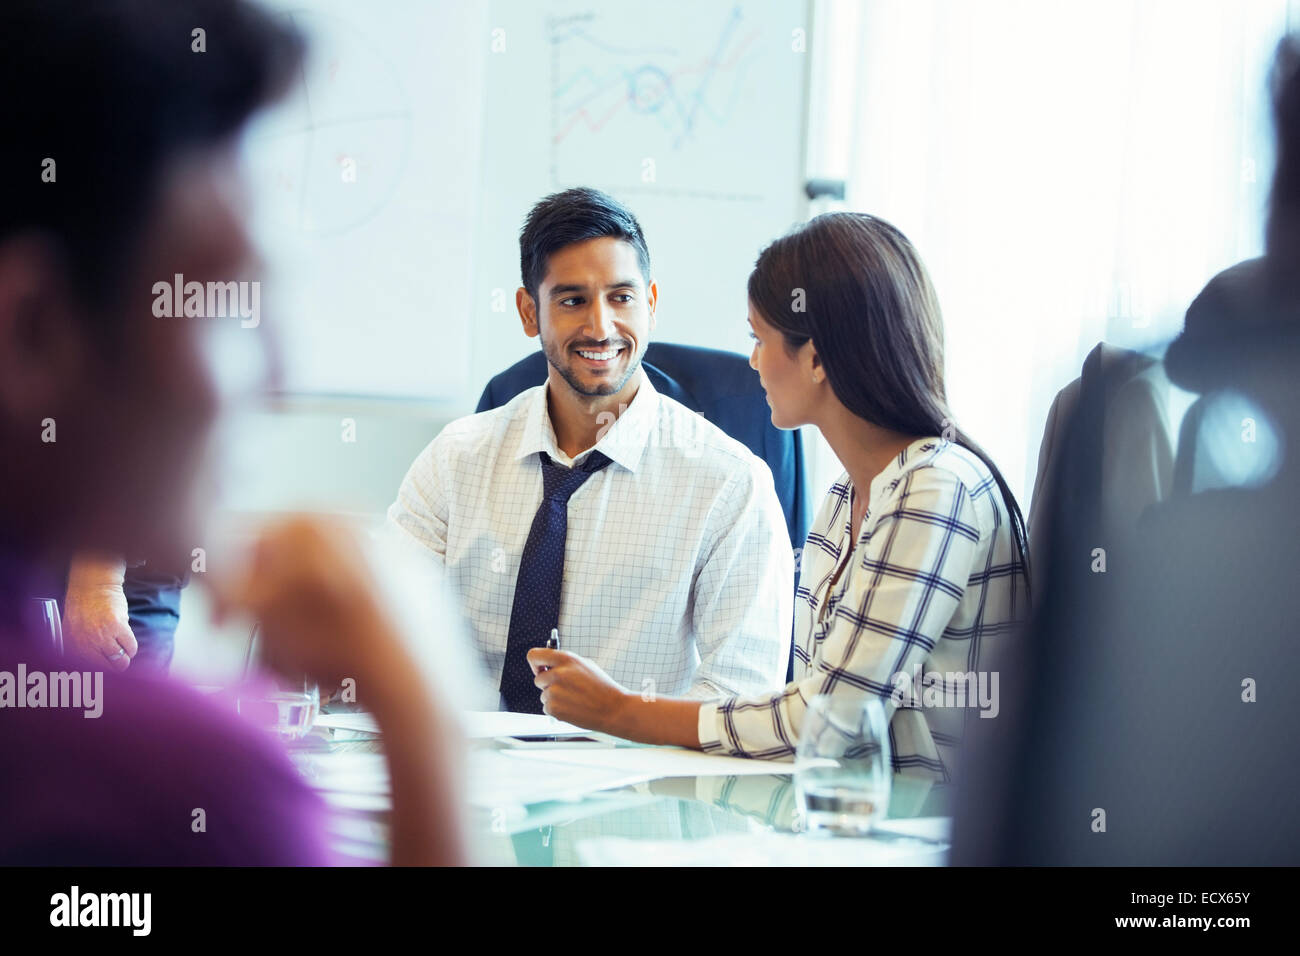 Businesswoman and businessman sitting and talking in conference room during business meeting Stock Photo